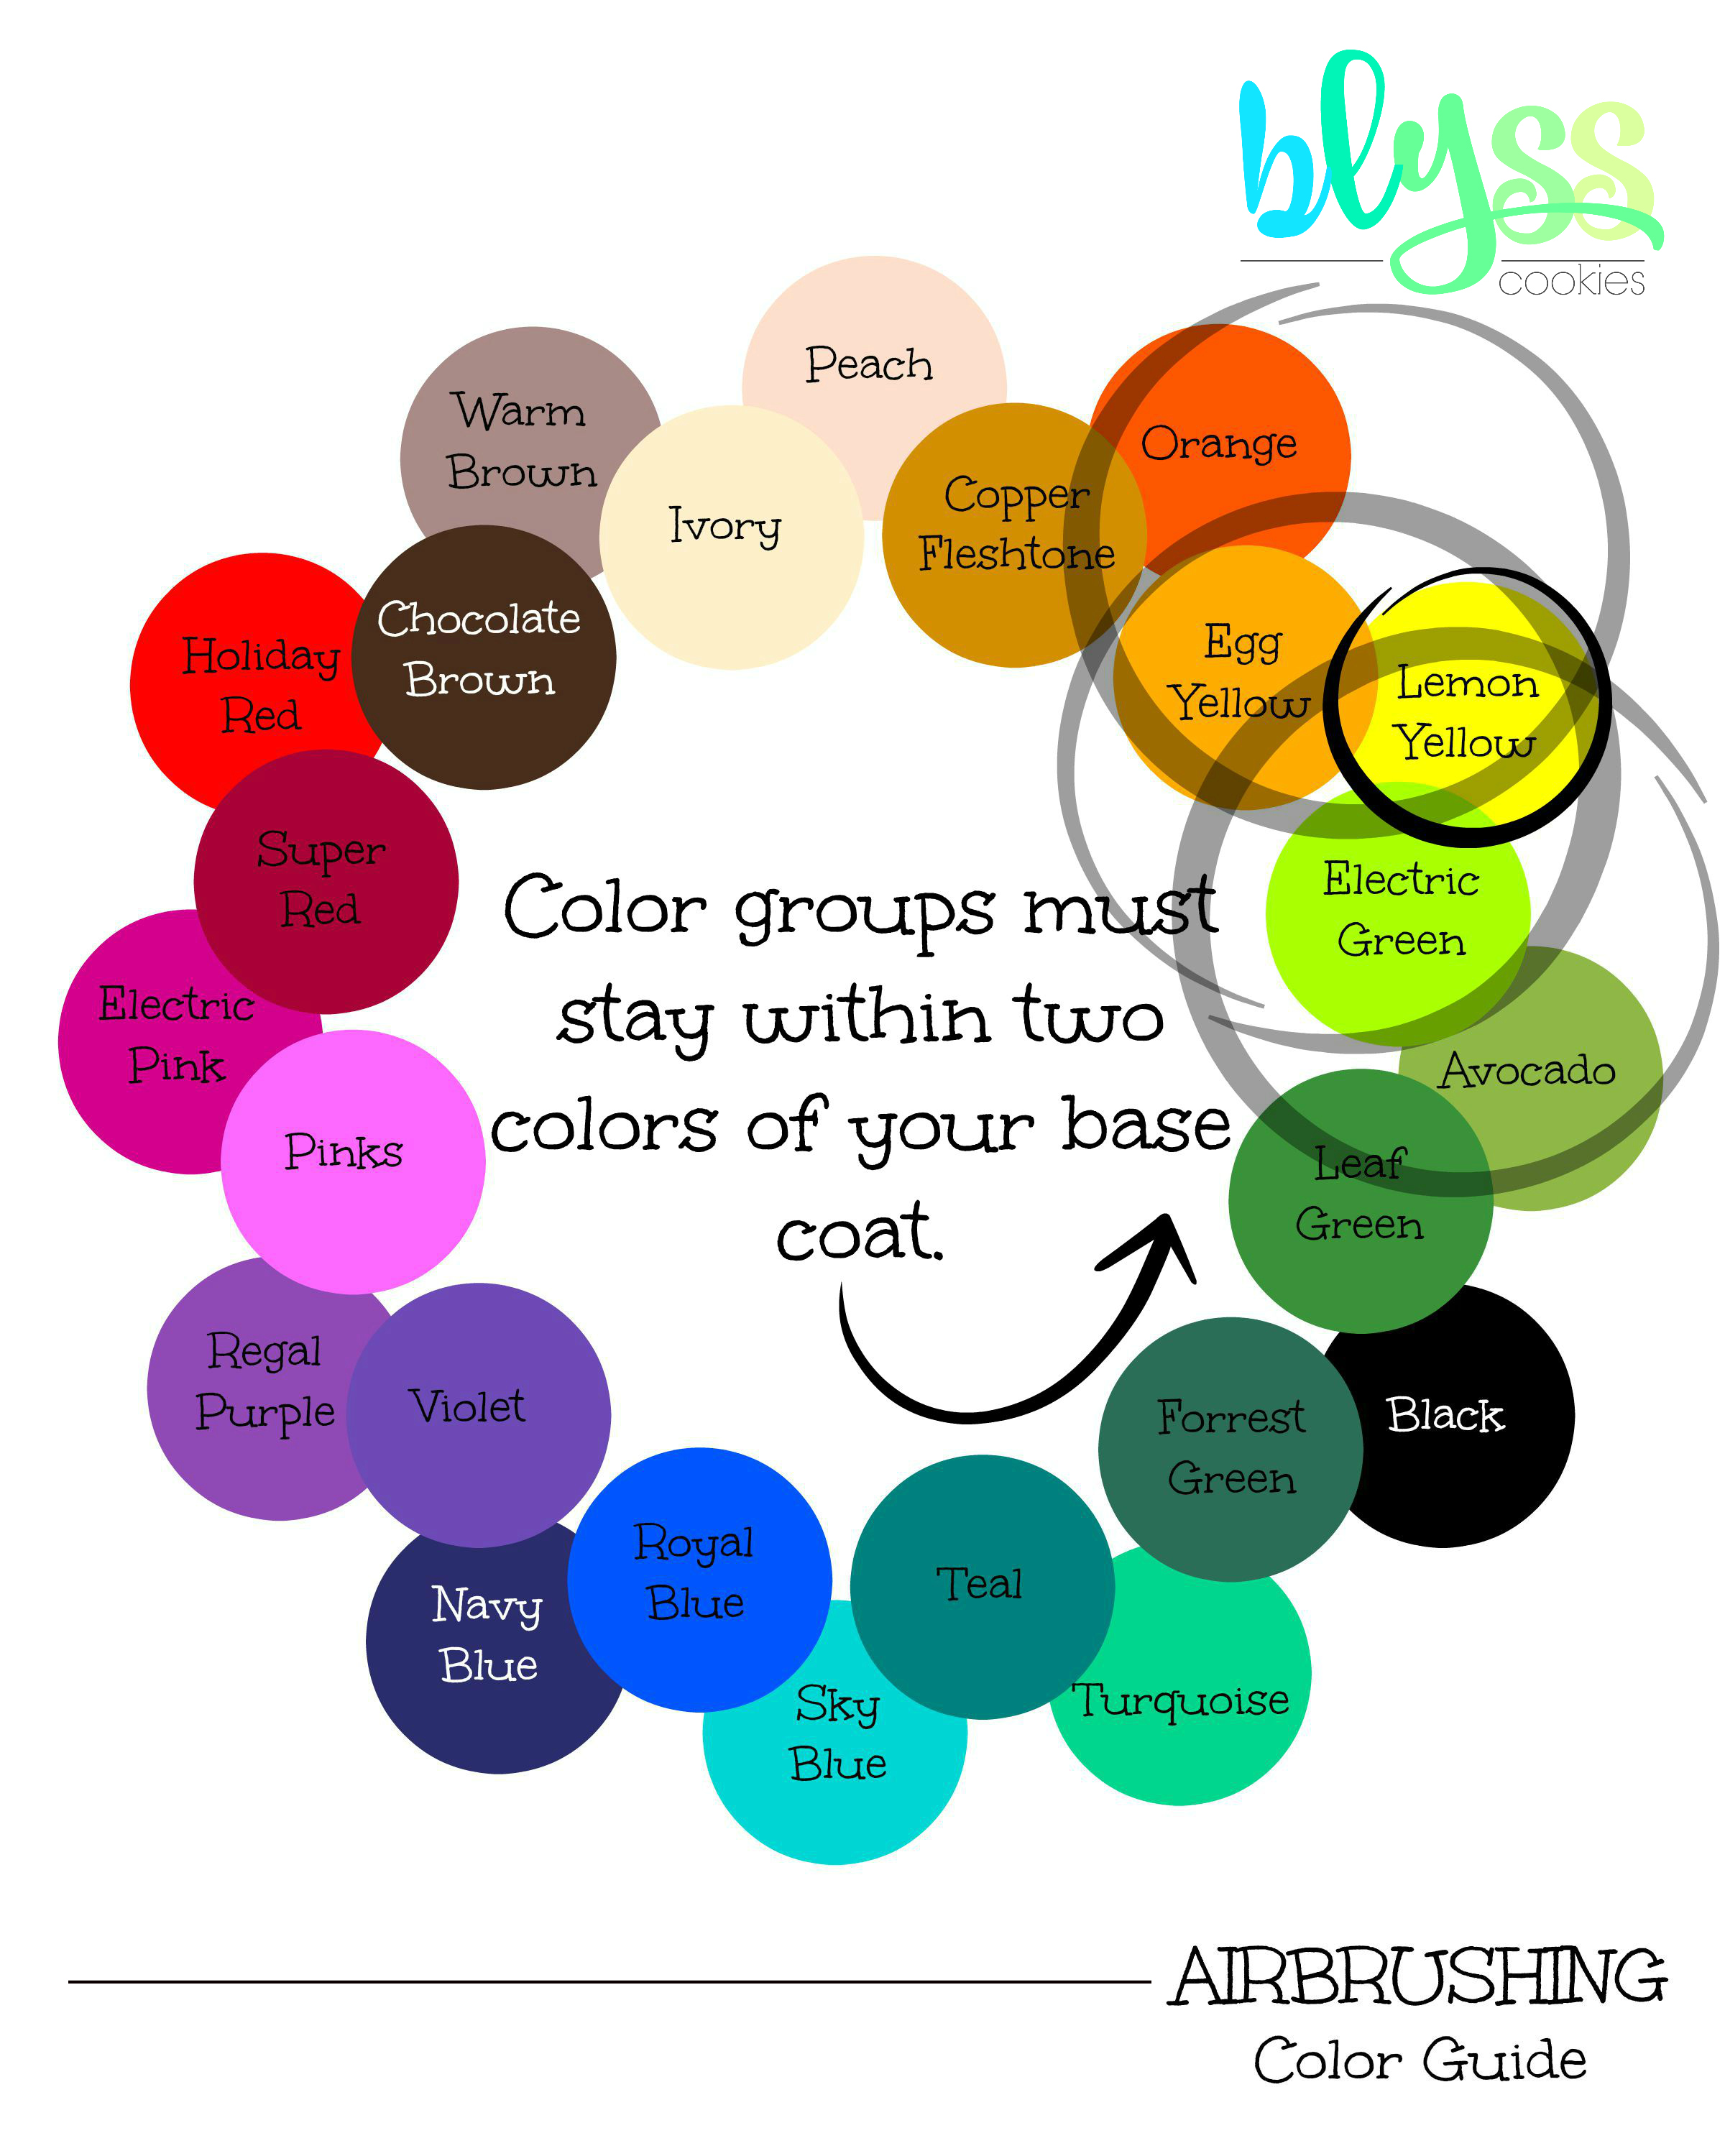 Airbrushing Color Guide3.jpg